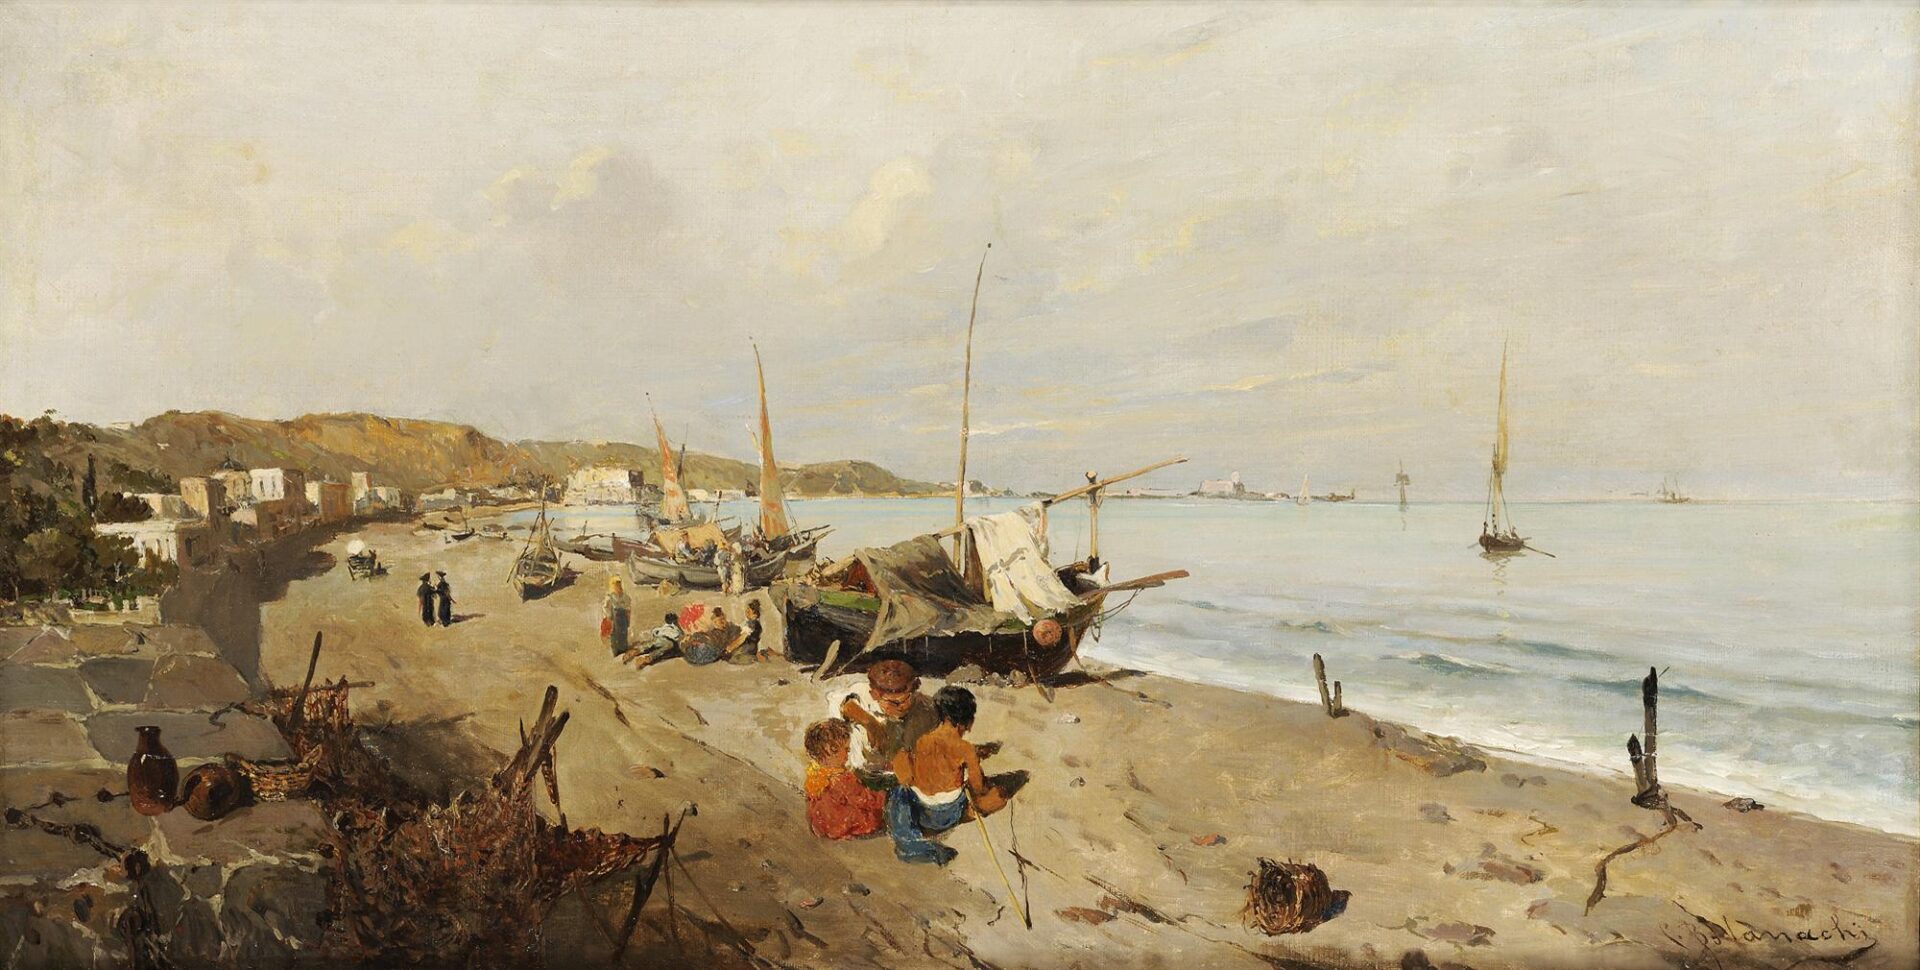 Boats and Children on the Beach - Volanakis Κonstantinos